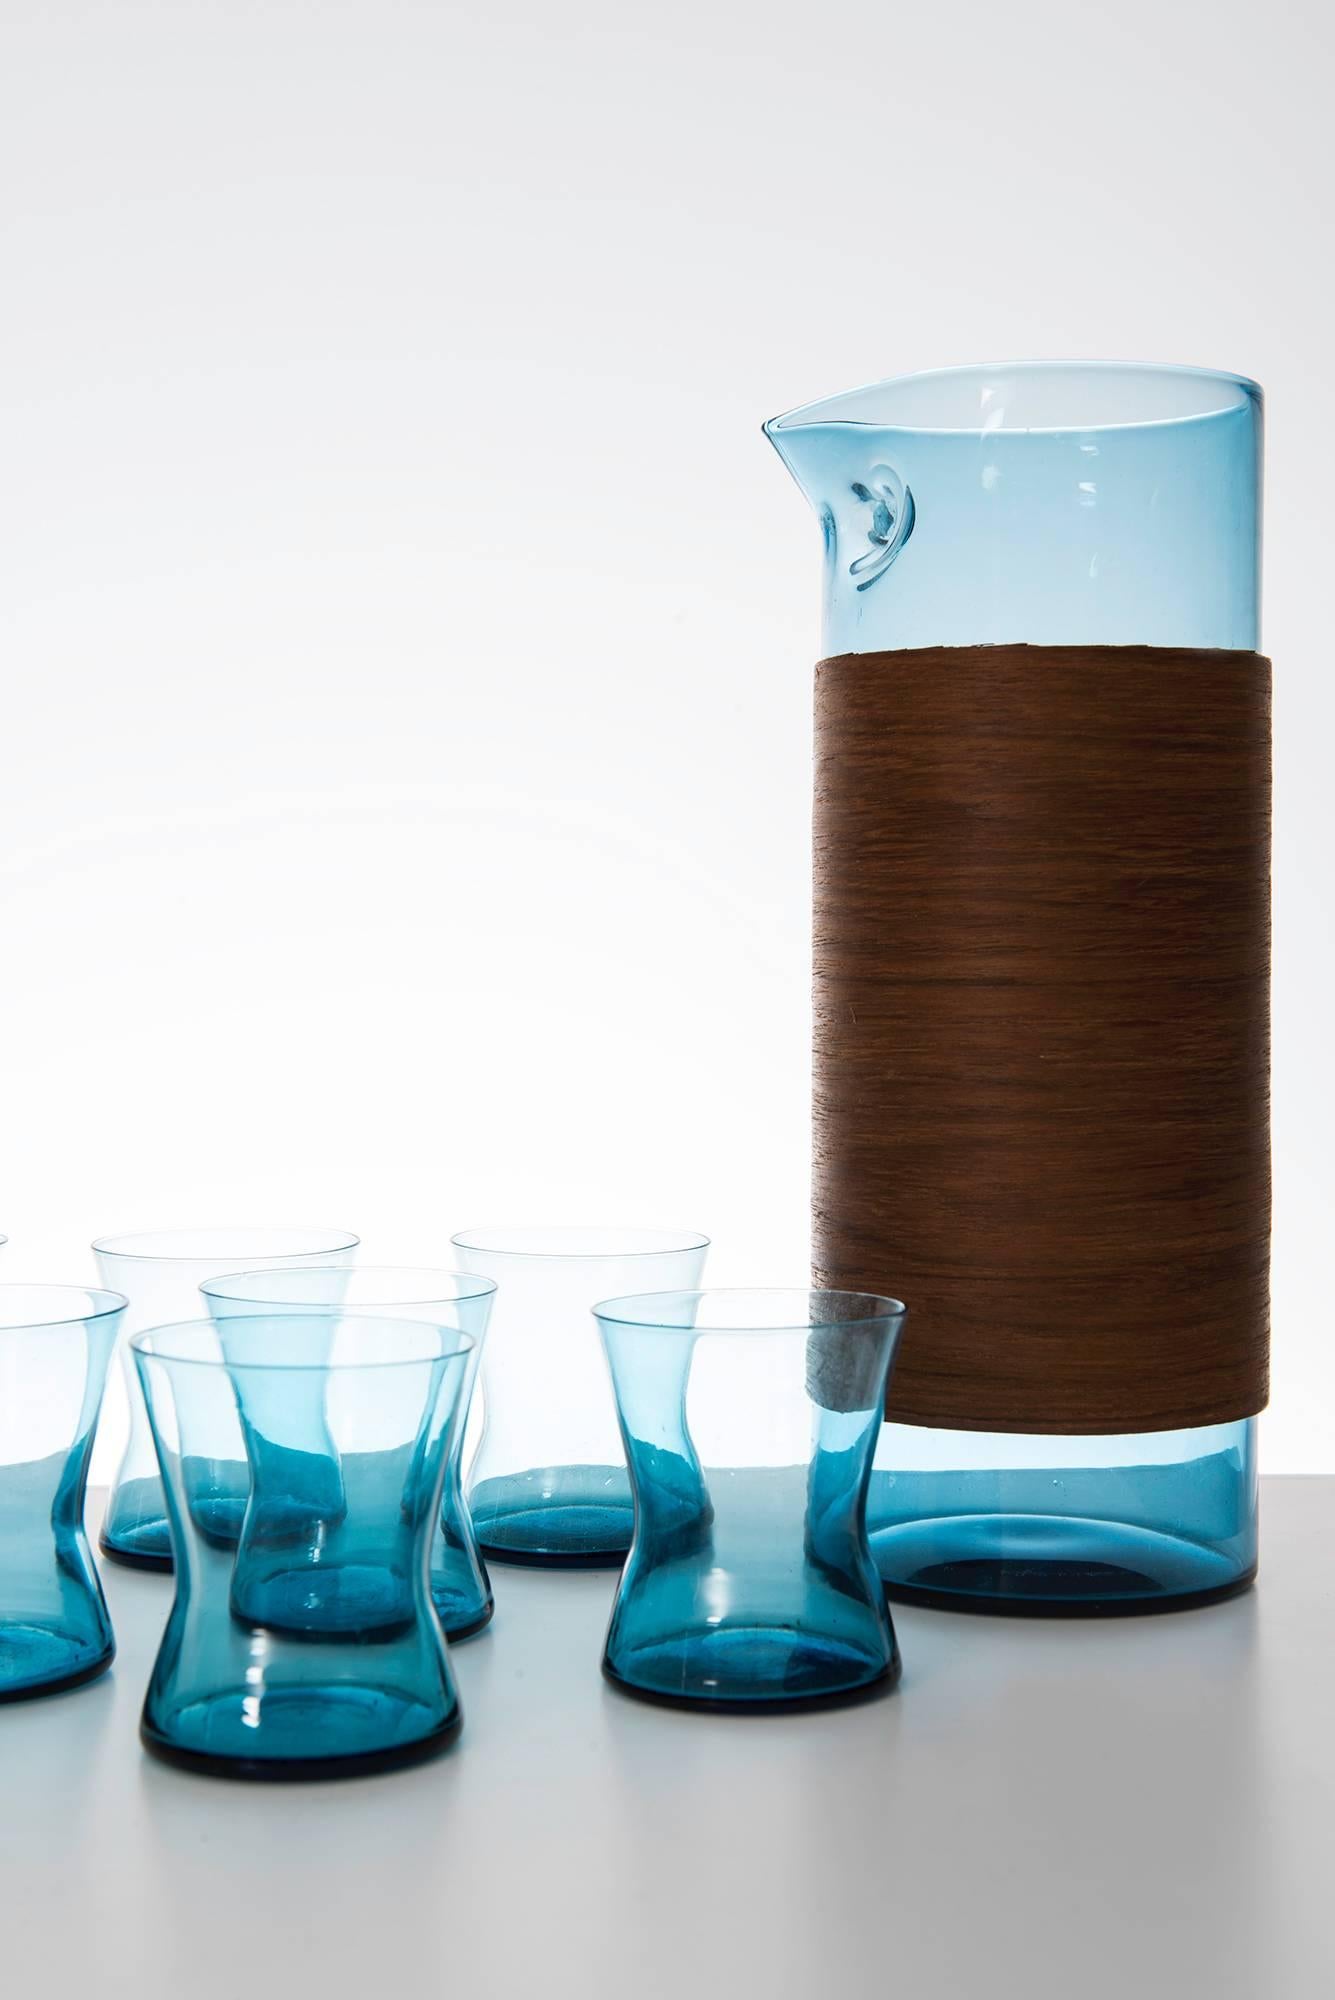 A set of ten glasses and carafe produced in Finland.